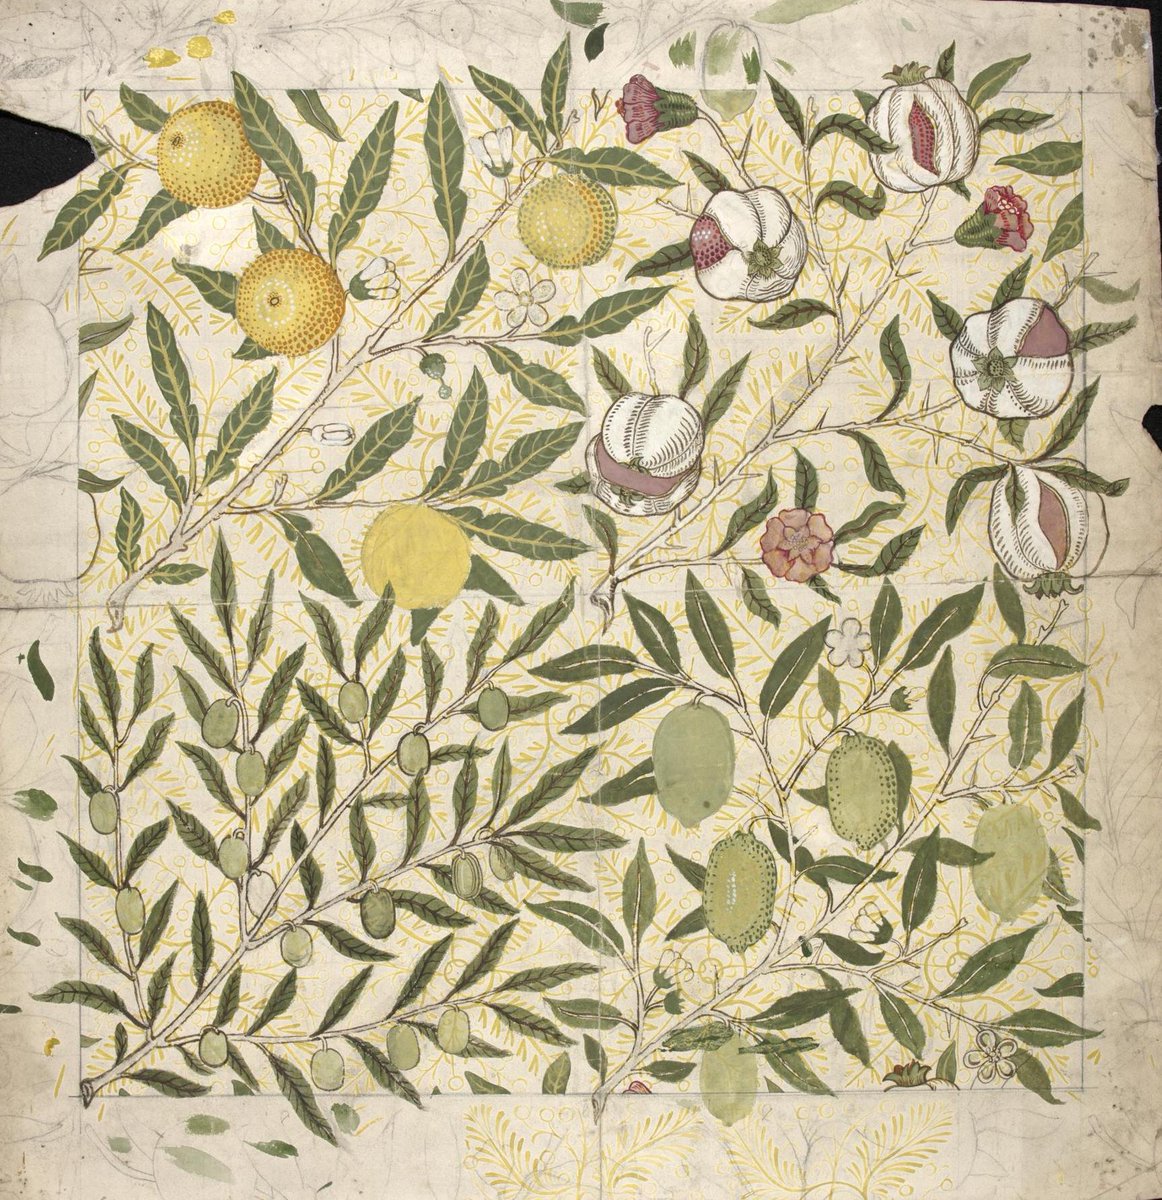 A draft of the pattern is held at the V&A. Their information notes that the design shows work by more than one designer. The pomegranates may be by the architect Philip Webb, who was Morris's friend and frequent collaborator.